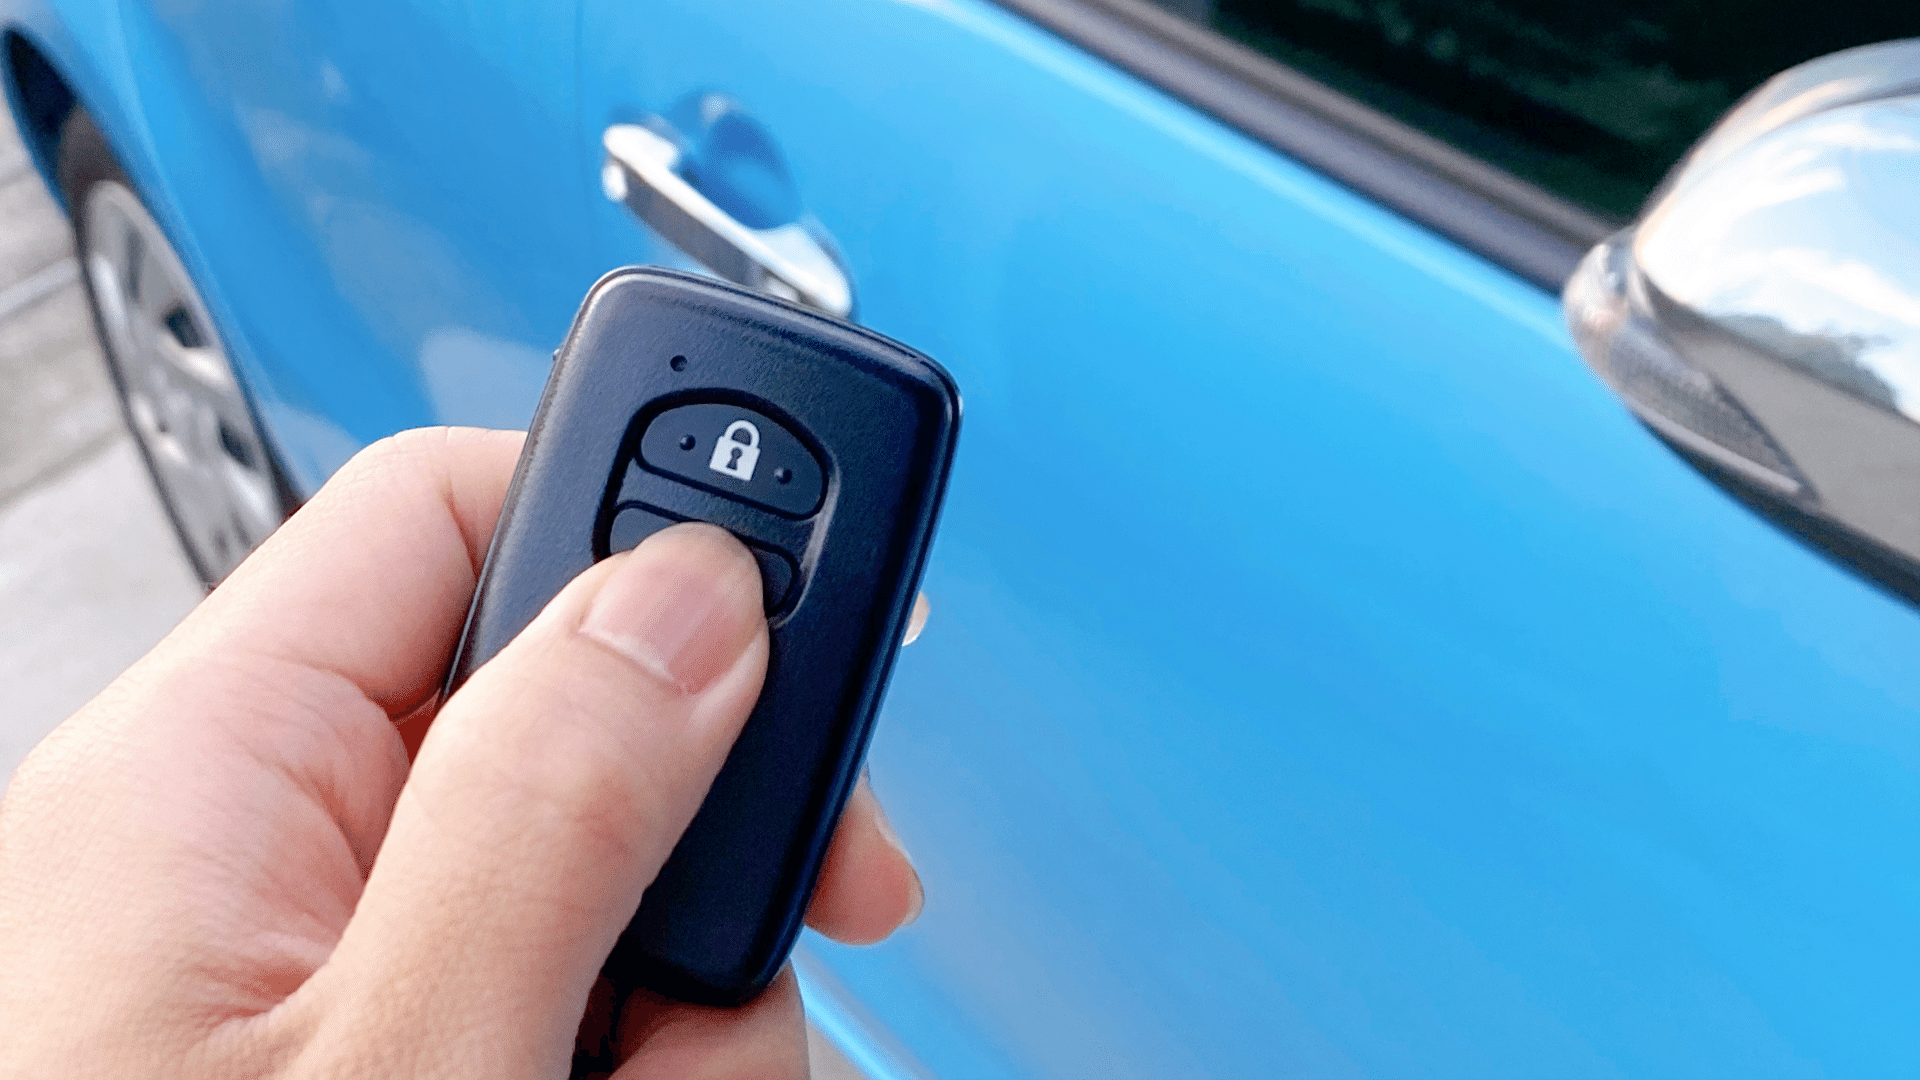 How to Disable Your Toyota’s Smart Key System